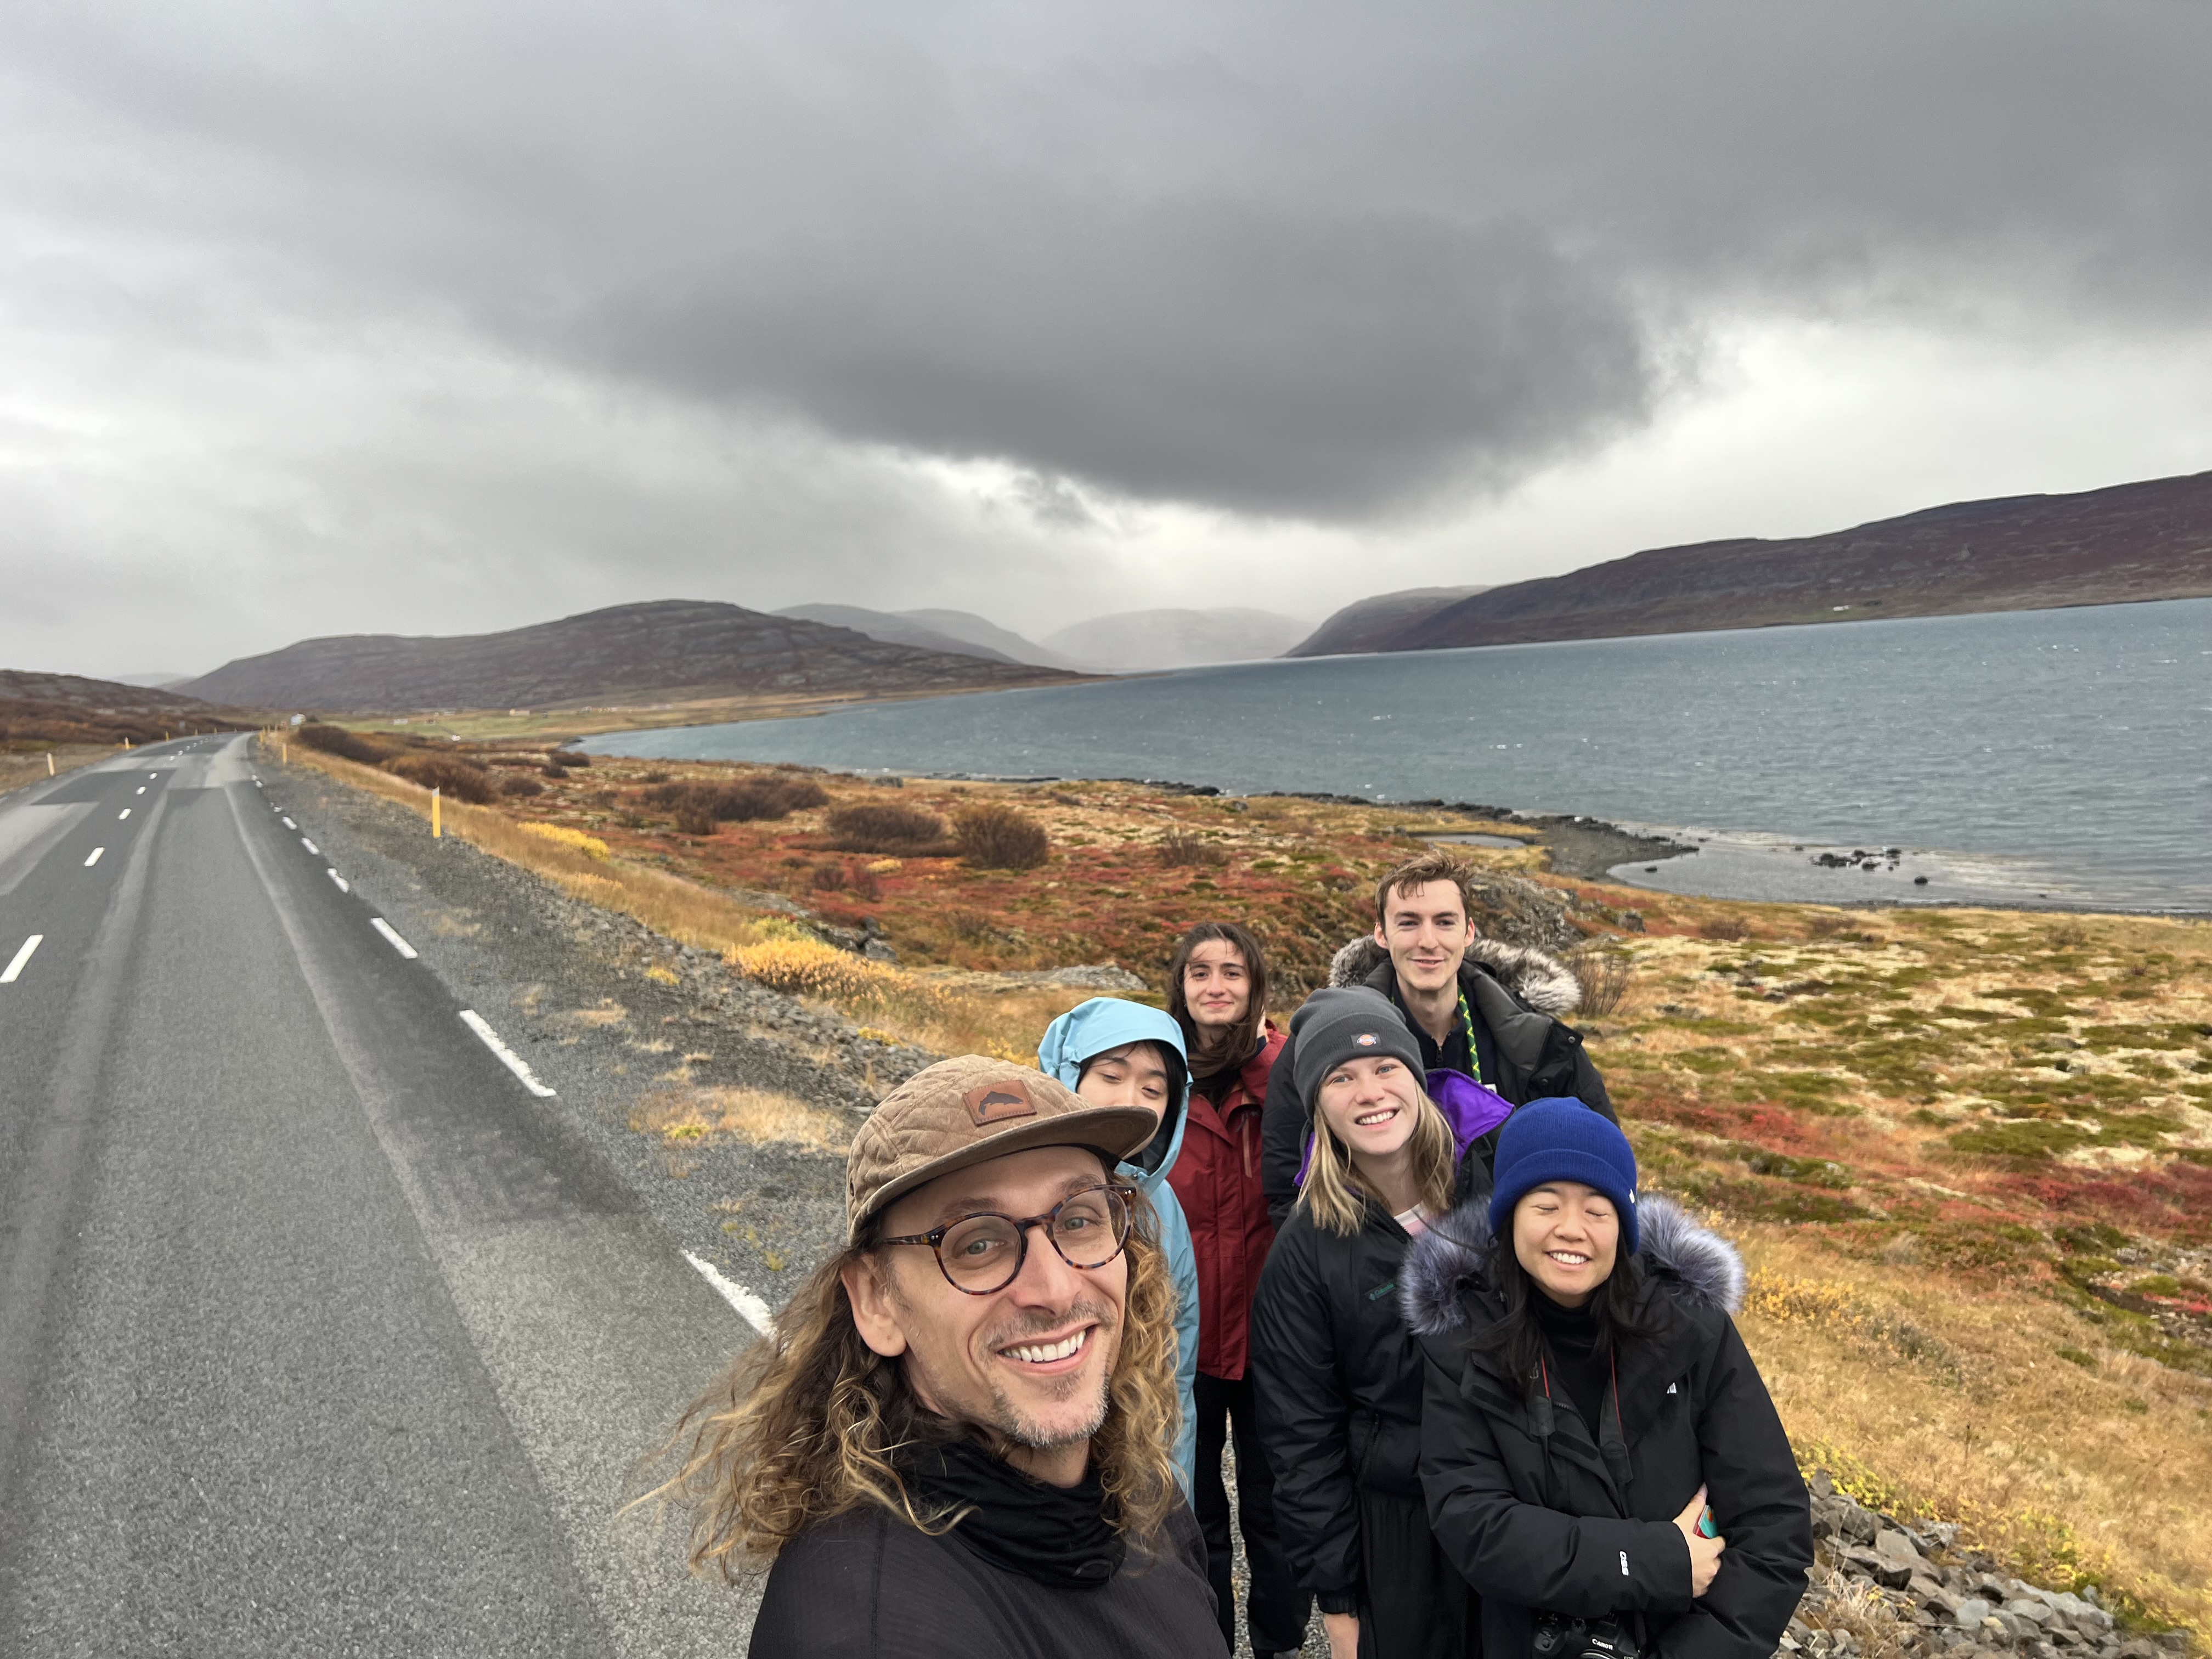 Six people take a group selfie by the side of the road in Iceland, with mountains and water in the distance